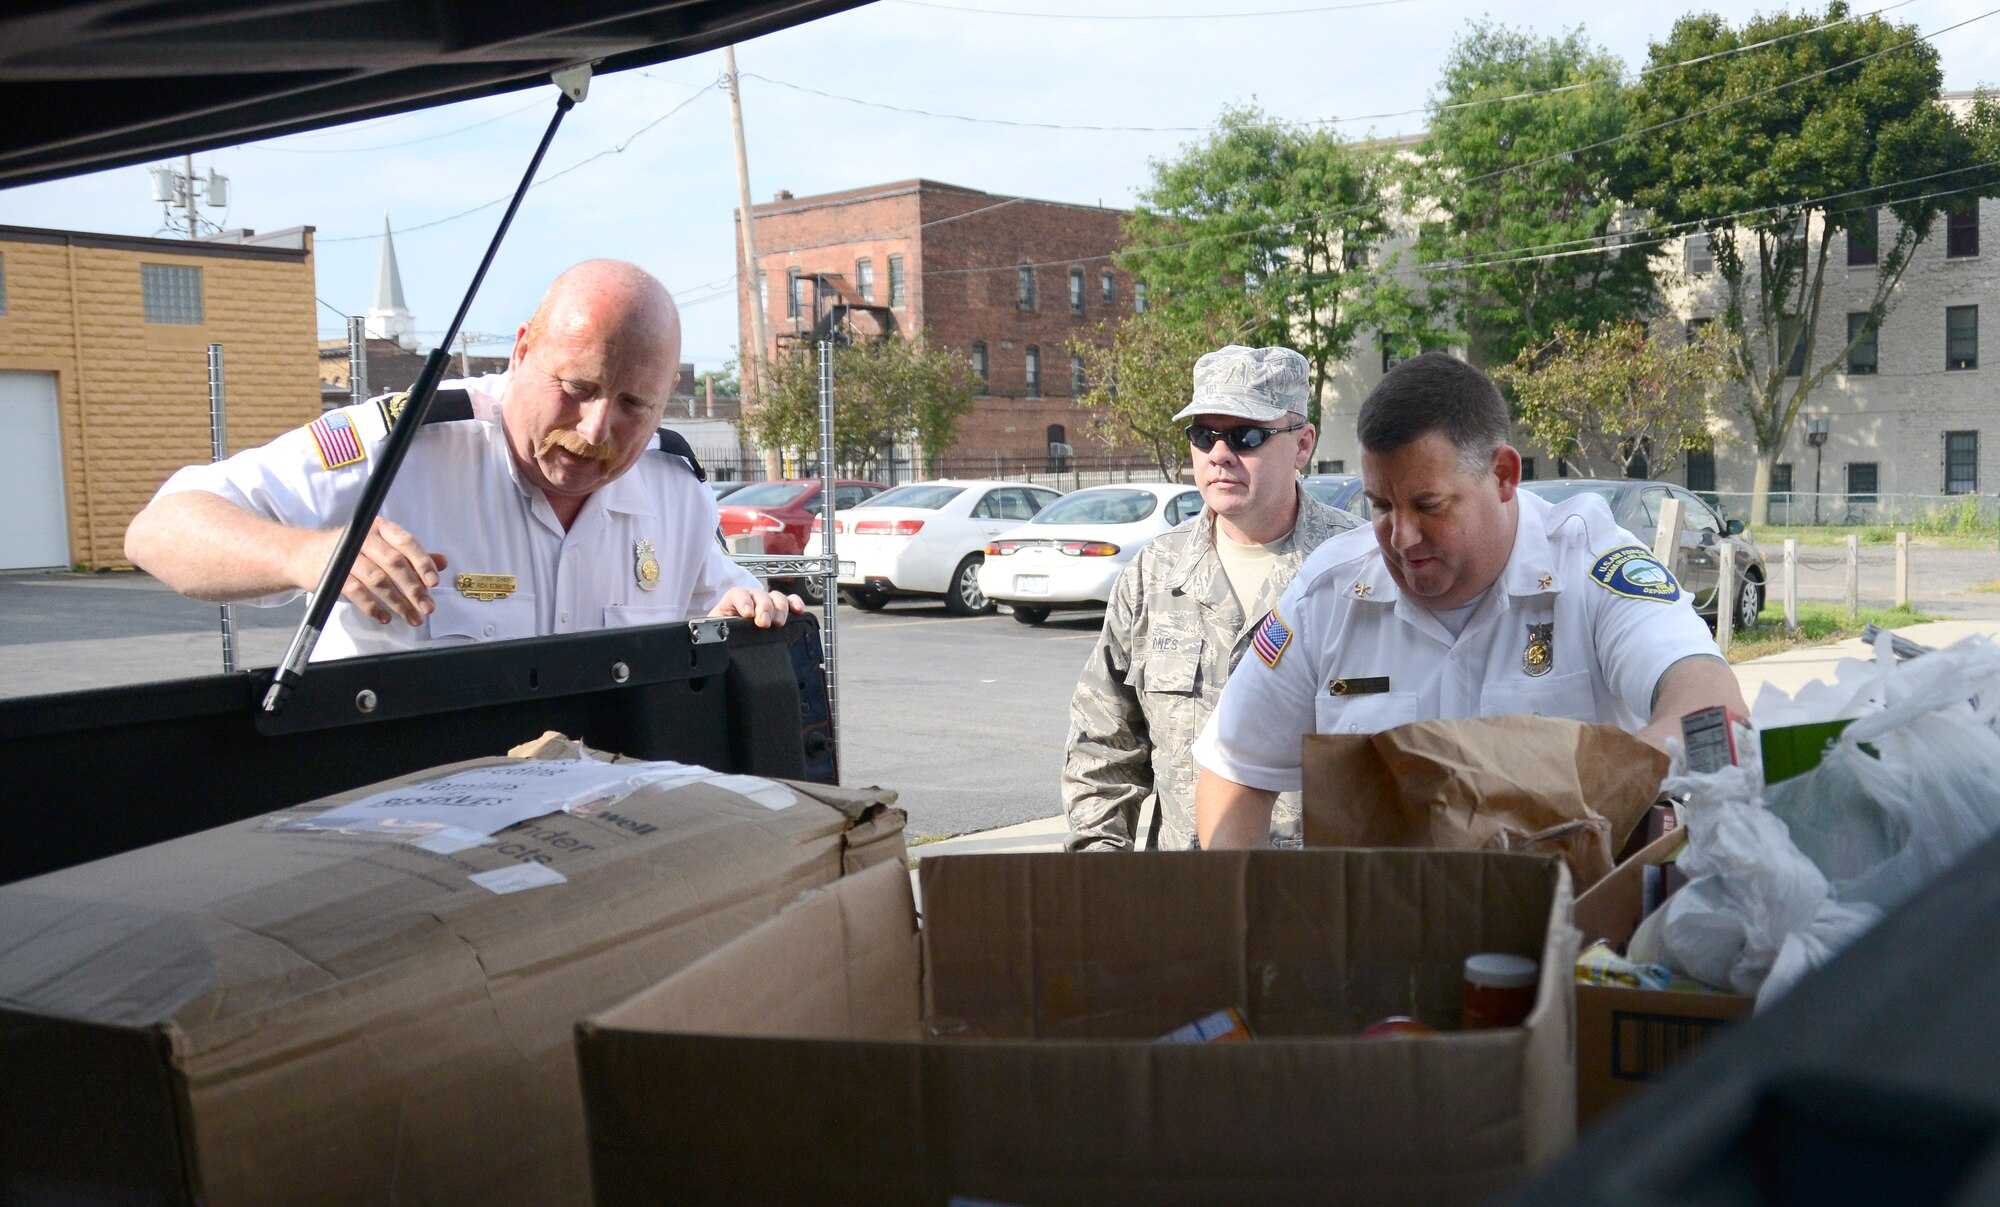 Niagara Falls Air Reserve Station Fire Chief Richard Kennerson, Assistant Chief of Fire Prevention John Schultz, and Chaplain Assistant Tech Sgt. Terry Jones unload food to be donated to Heart, Love and Soul Inc. Food Pantry and Dining Room located in Niagara Falls, New York September 5, 2014.  According to the website of U.S. Department of Agriculture, since the Feds Feed Families campaign began in 2009, Federal workers have donated and collected 24.1 million pounds of food and other non-perishable items to support families across America. (U.S. Air Force photo by Tech. Sgt. Andrew Caya)